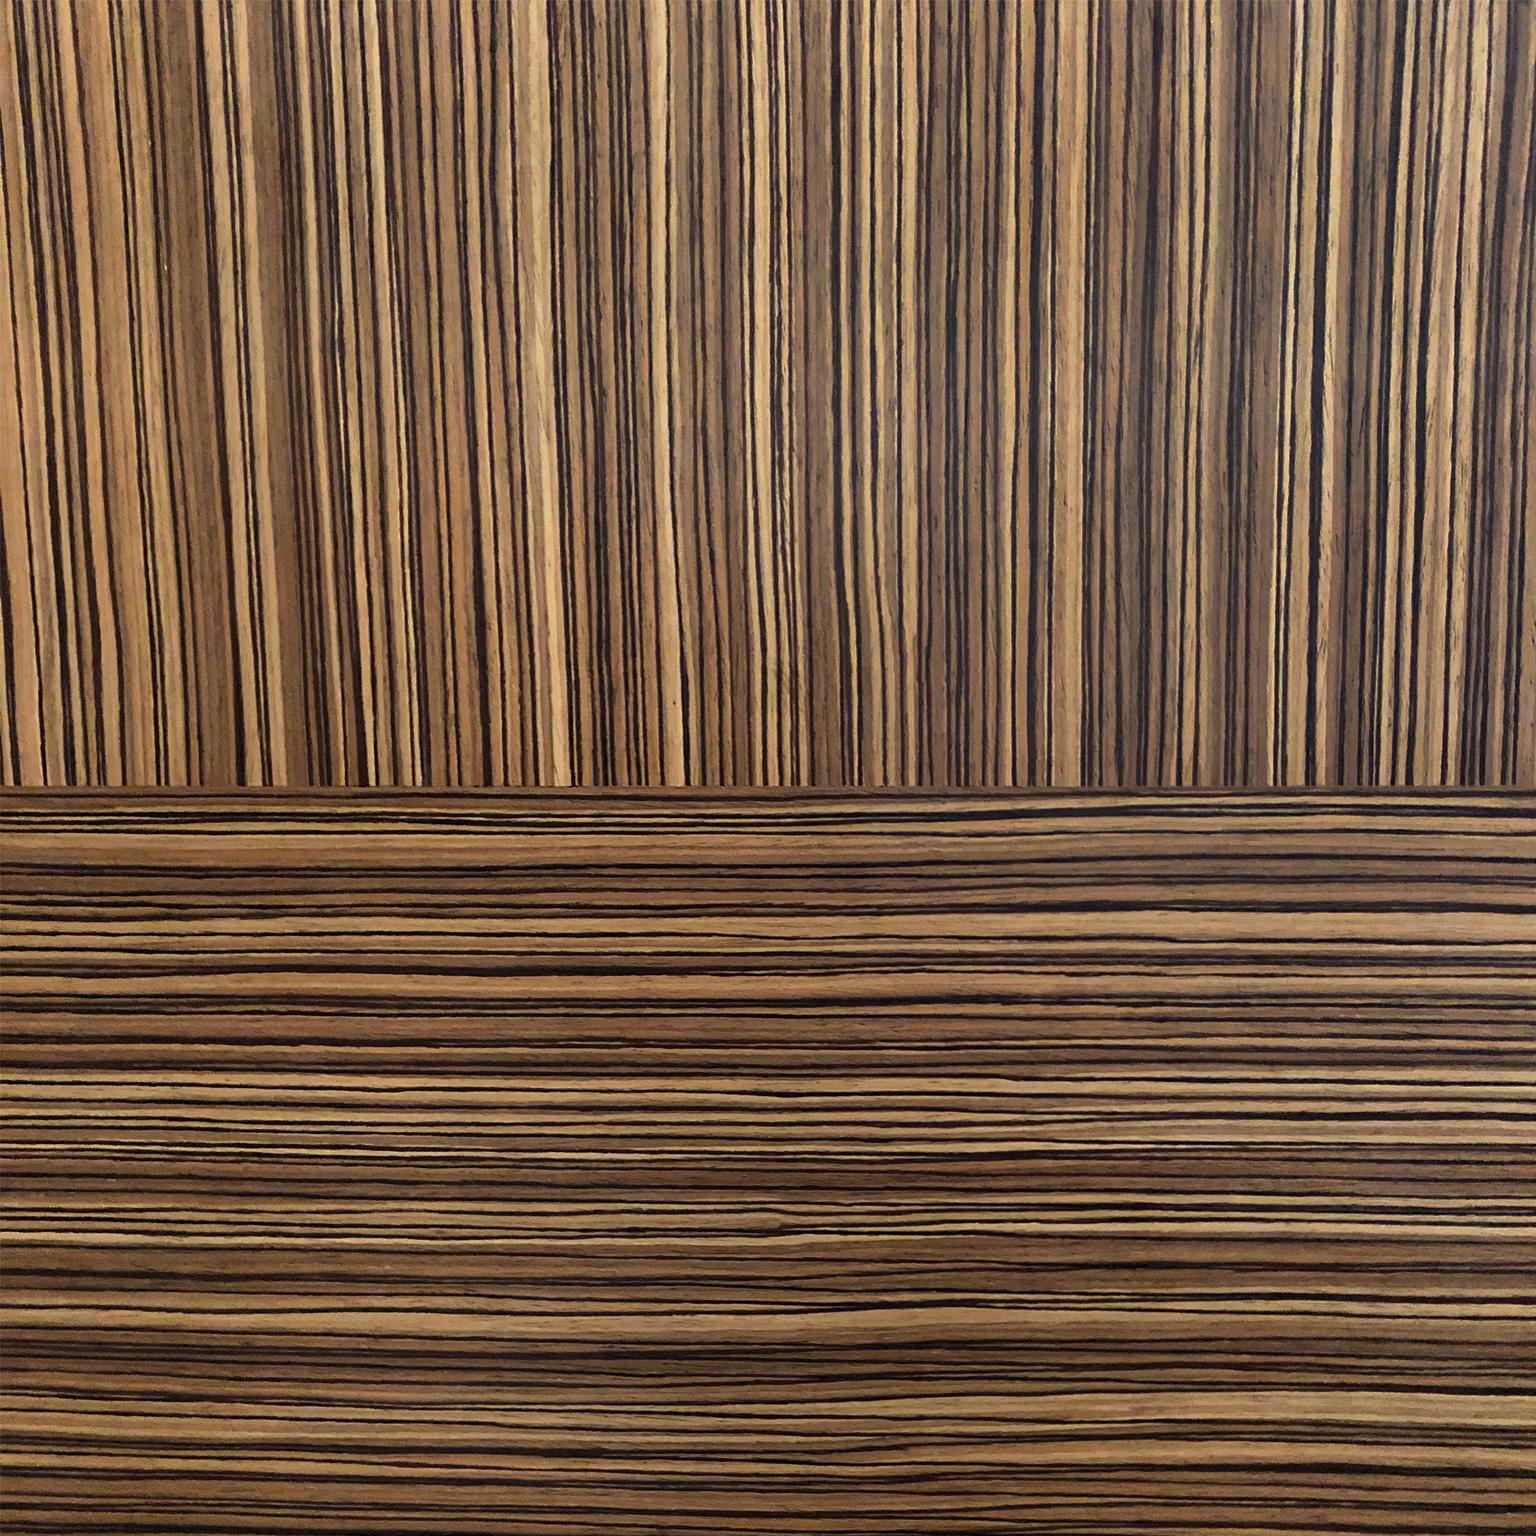 Italian Flair Exclusive Patchwork Zebra Wood Screen For Sale